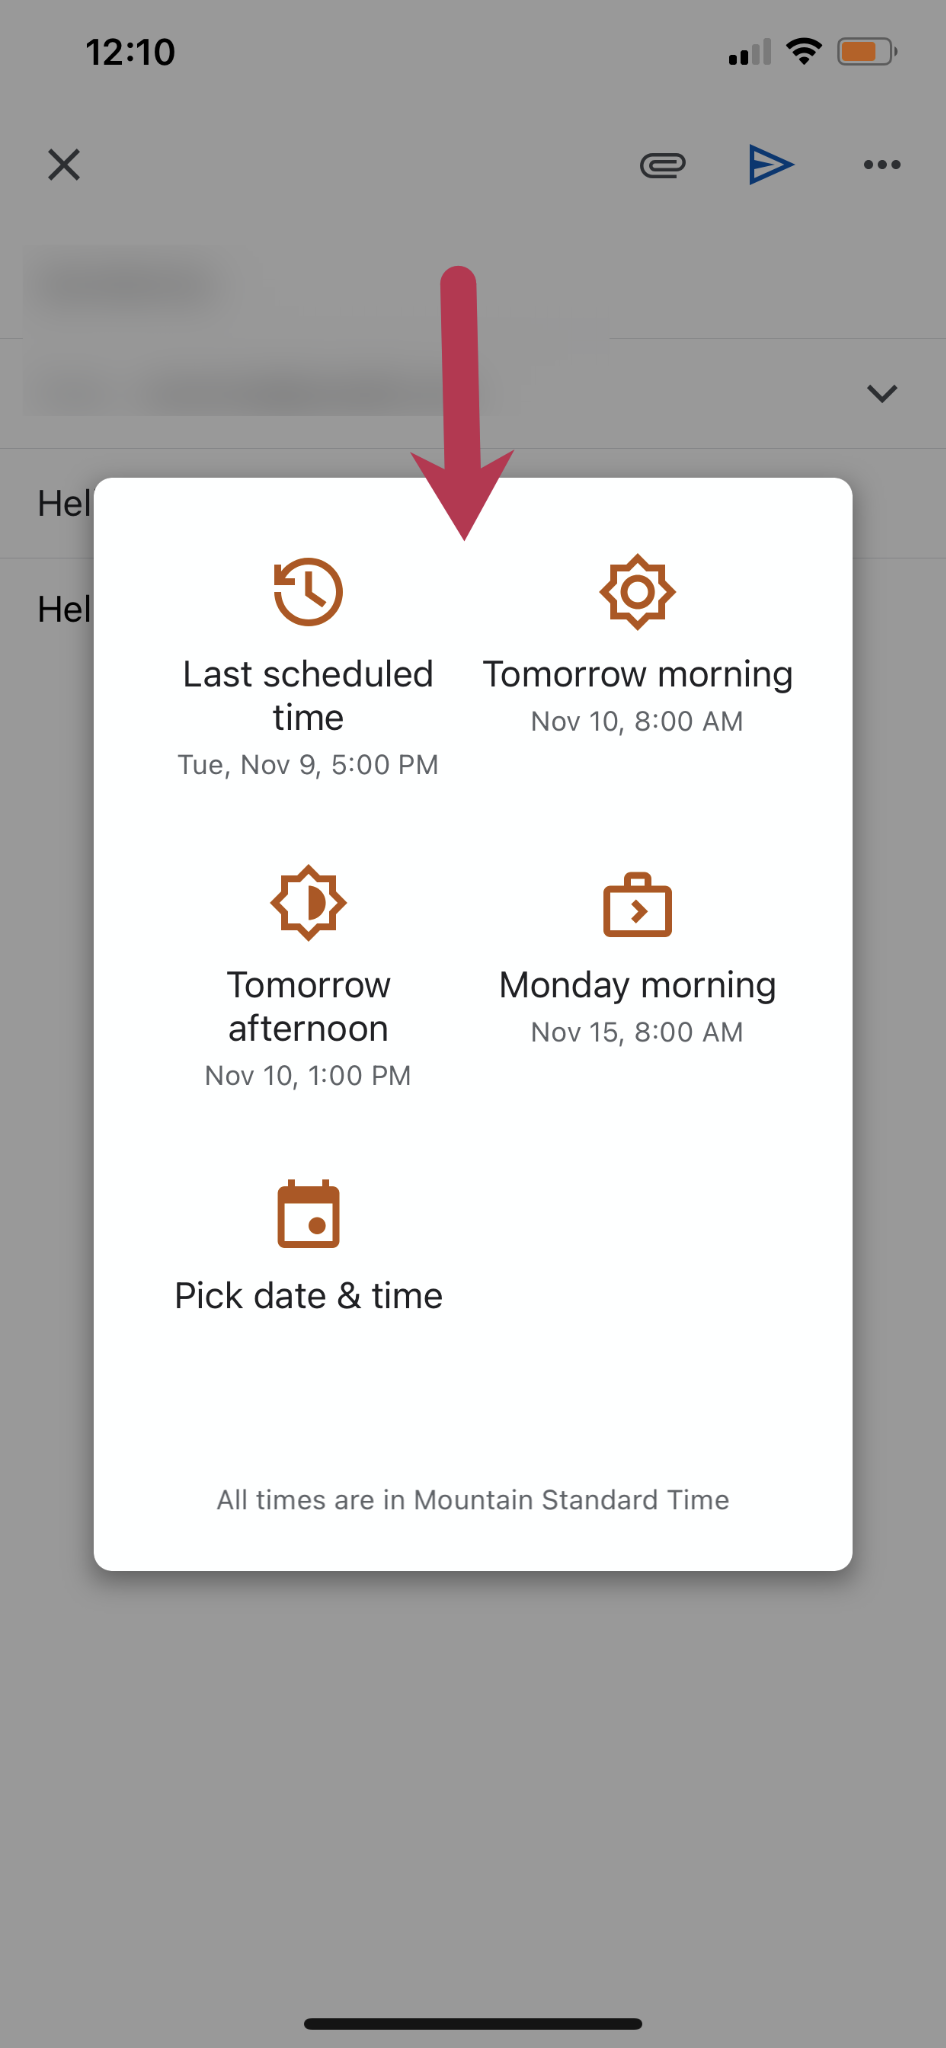 presets-for-schedule-send-option-in-Gmail-mobile